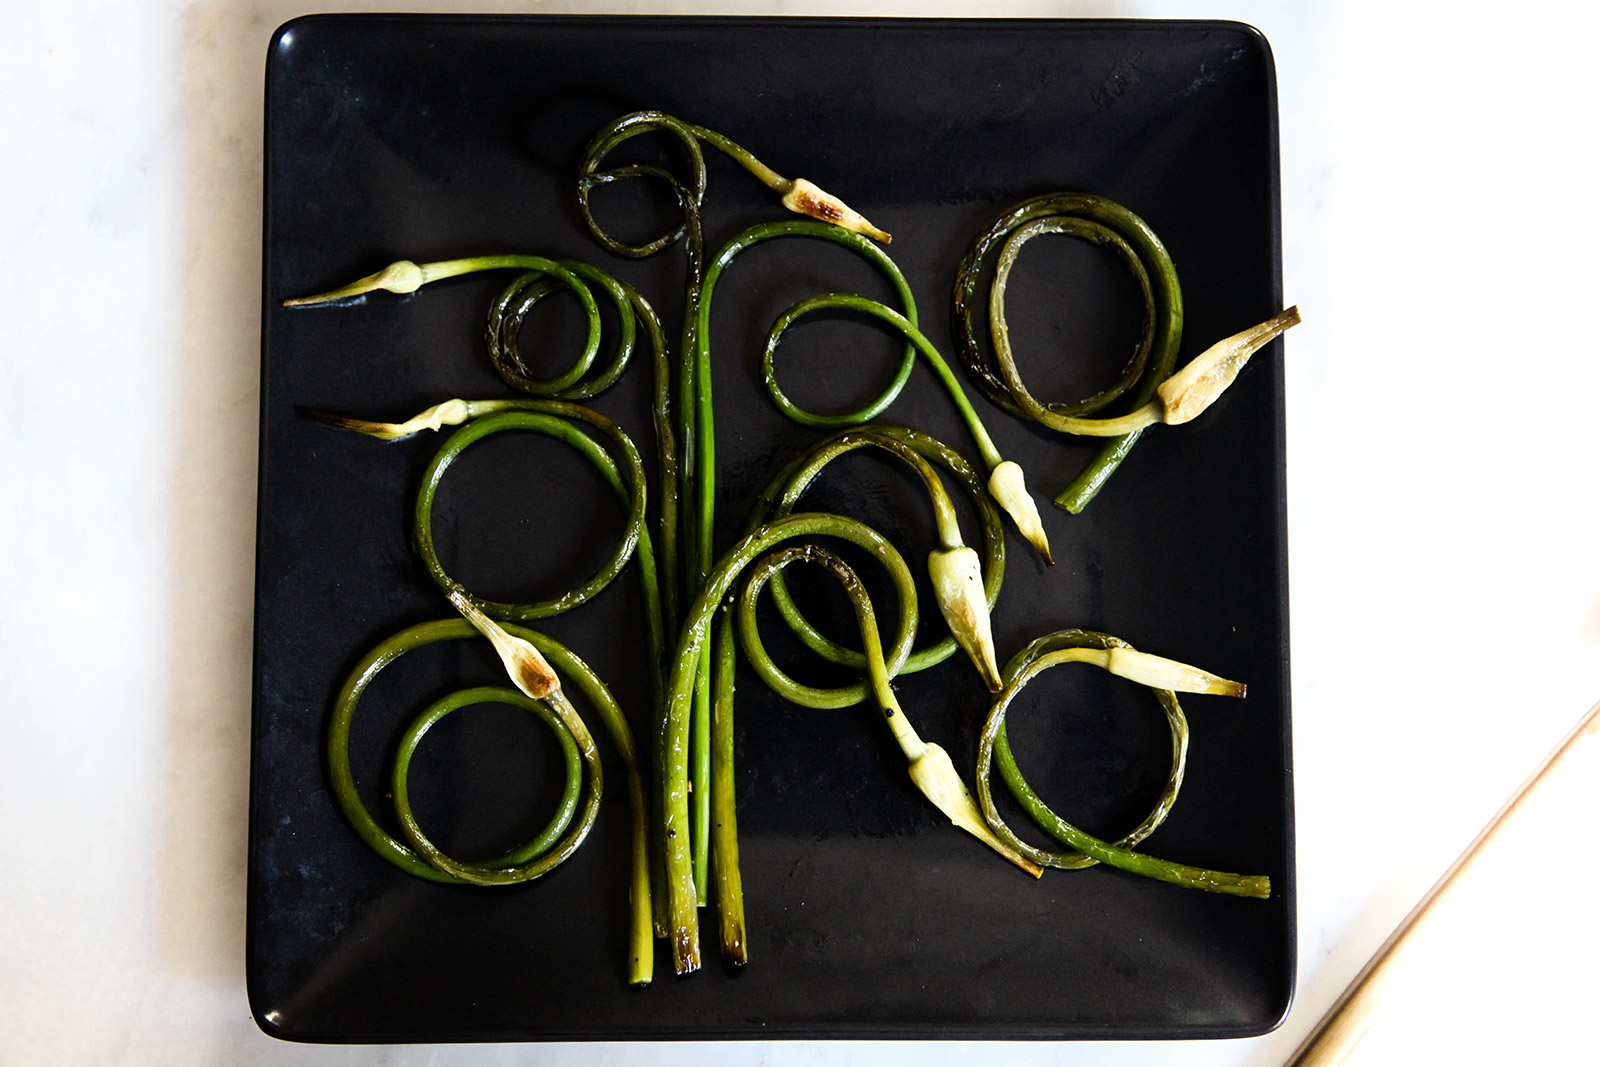 Garlic Scapes Sauteed with Olive Oil, Sea Salt & Freshly Ground Pepper